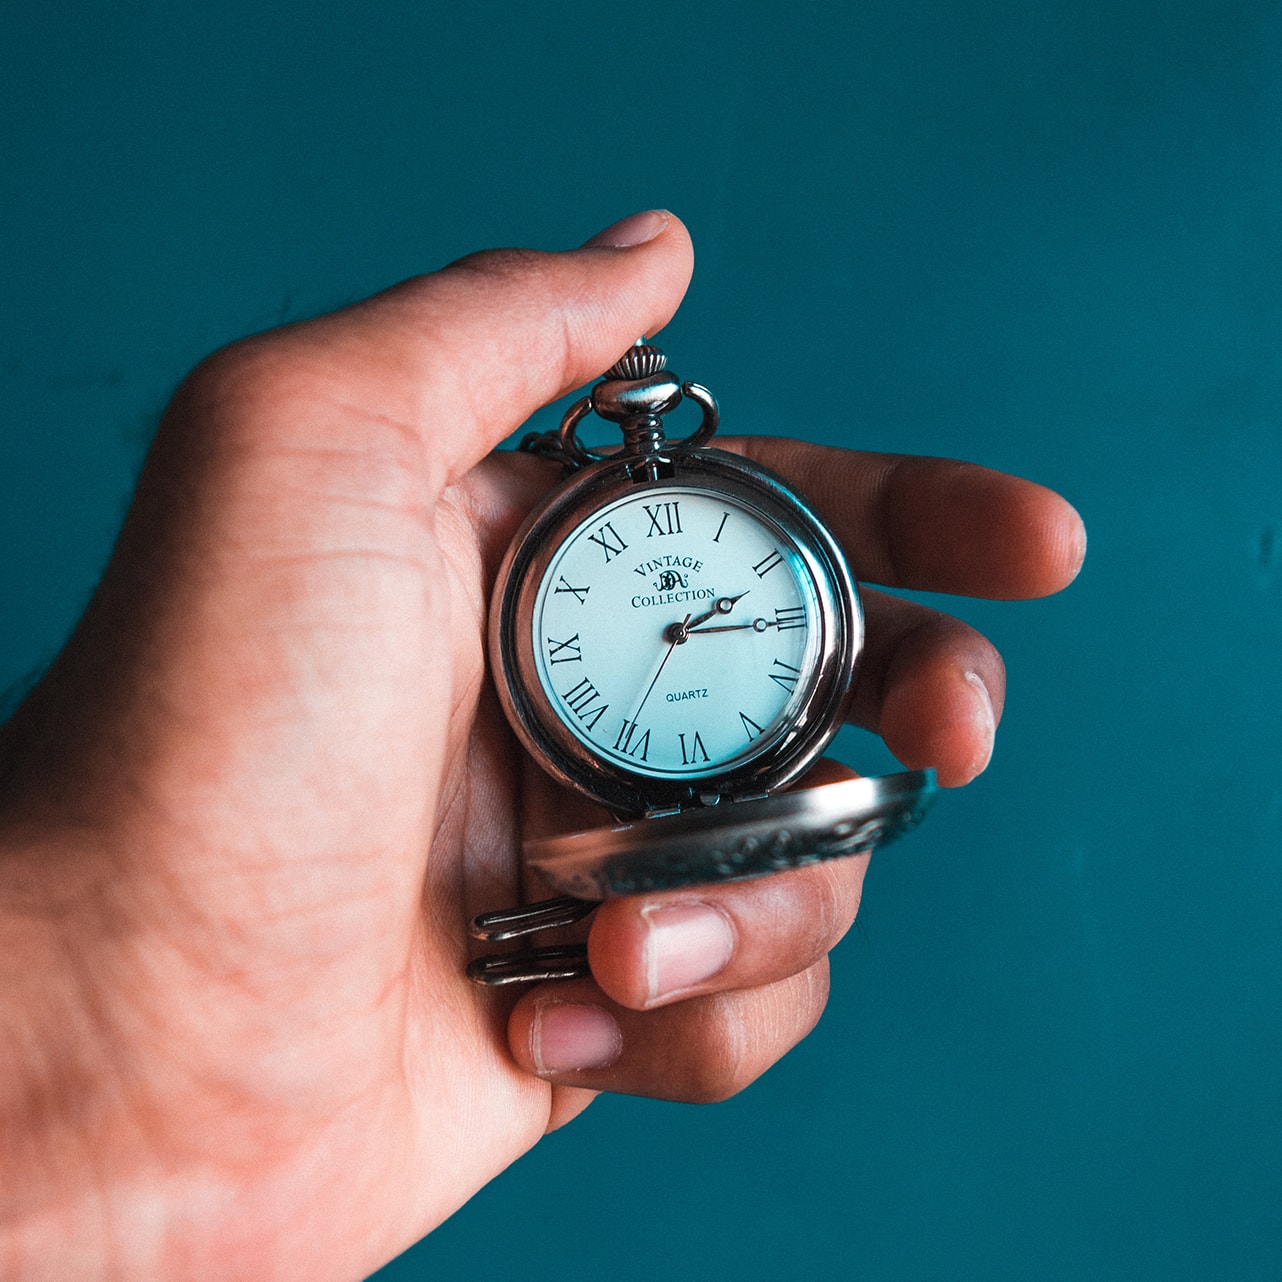 Close-up picture of a pocket watch held in front of a blue background | Photo by Akshar Dave on Unsplash